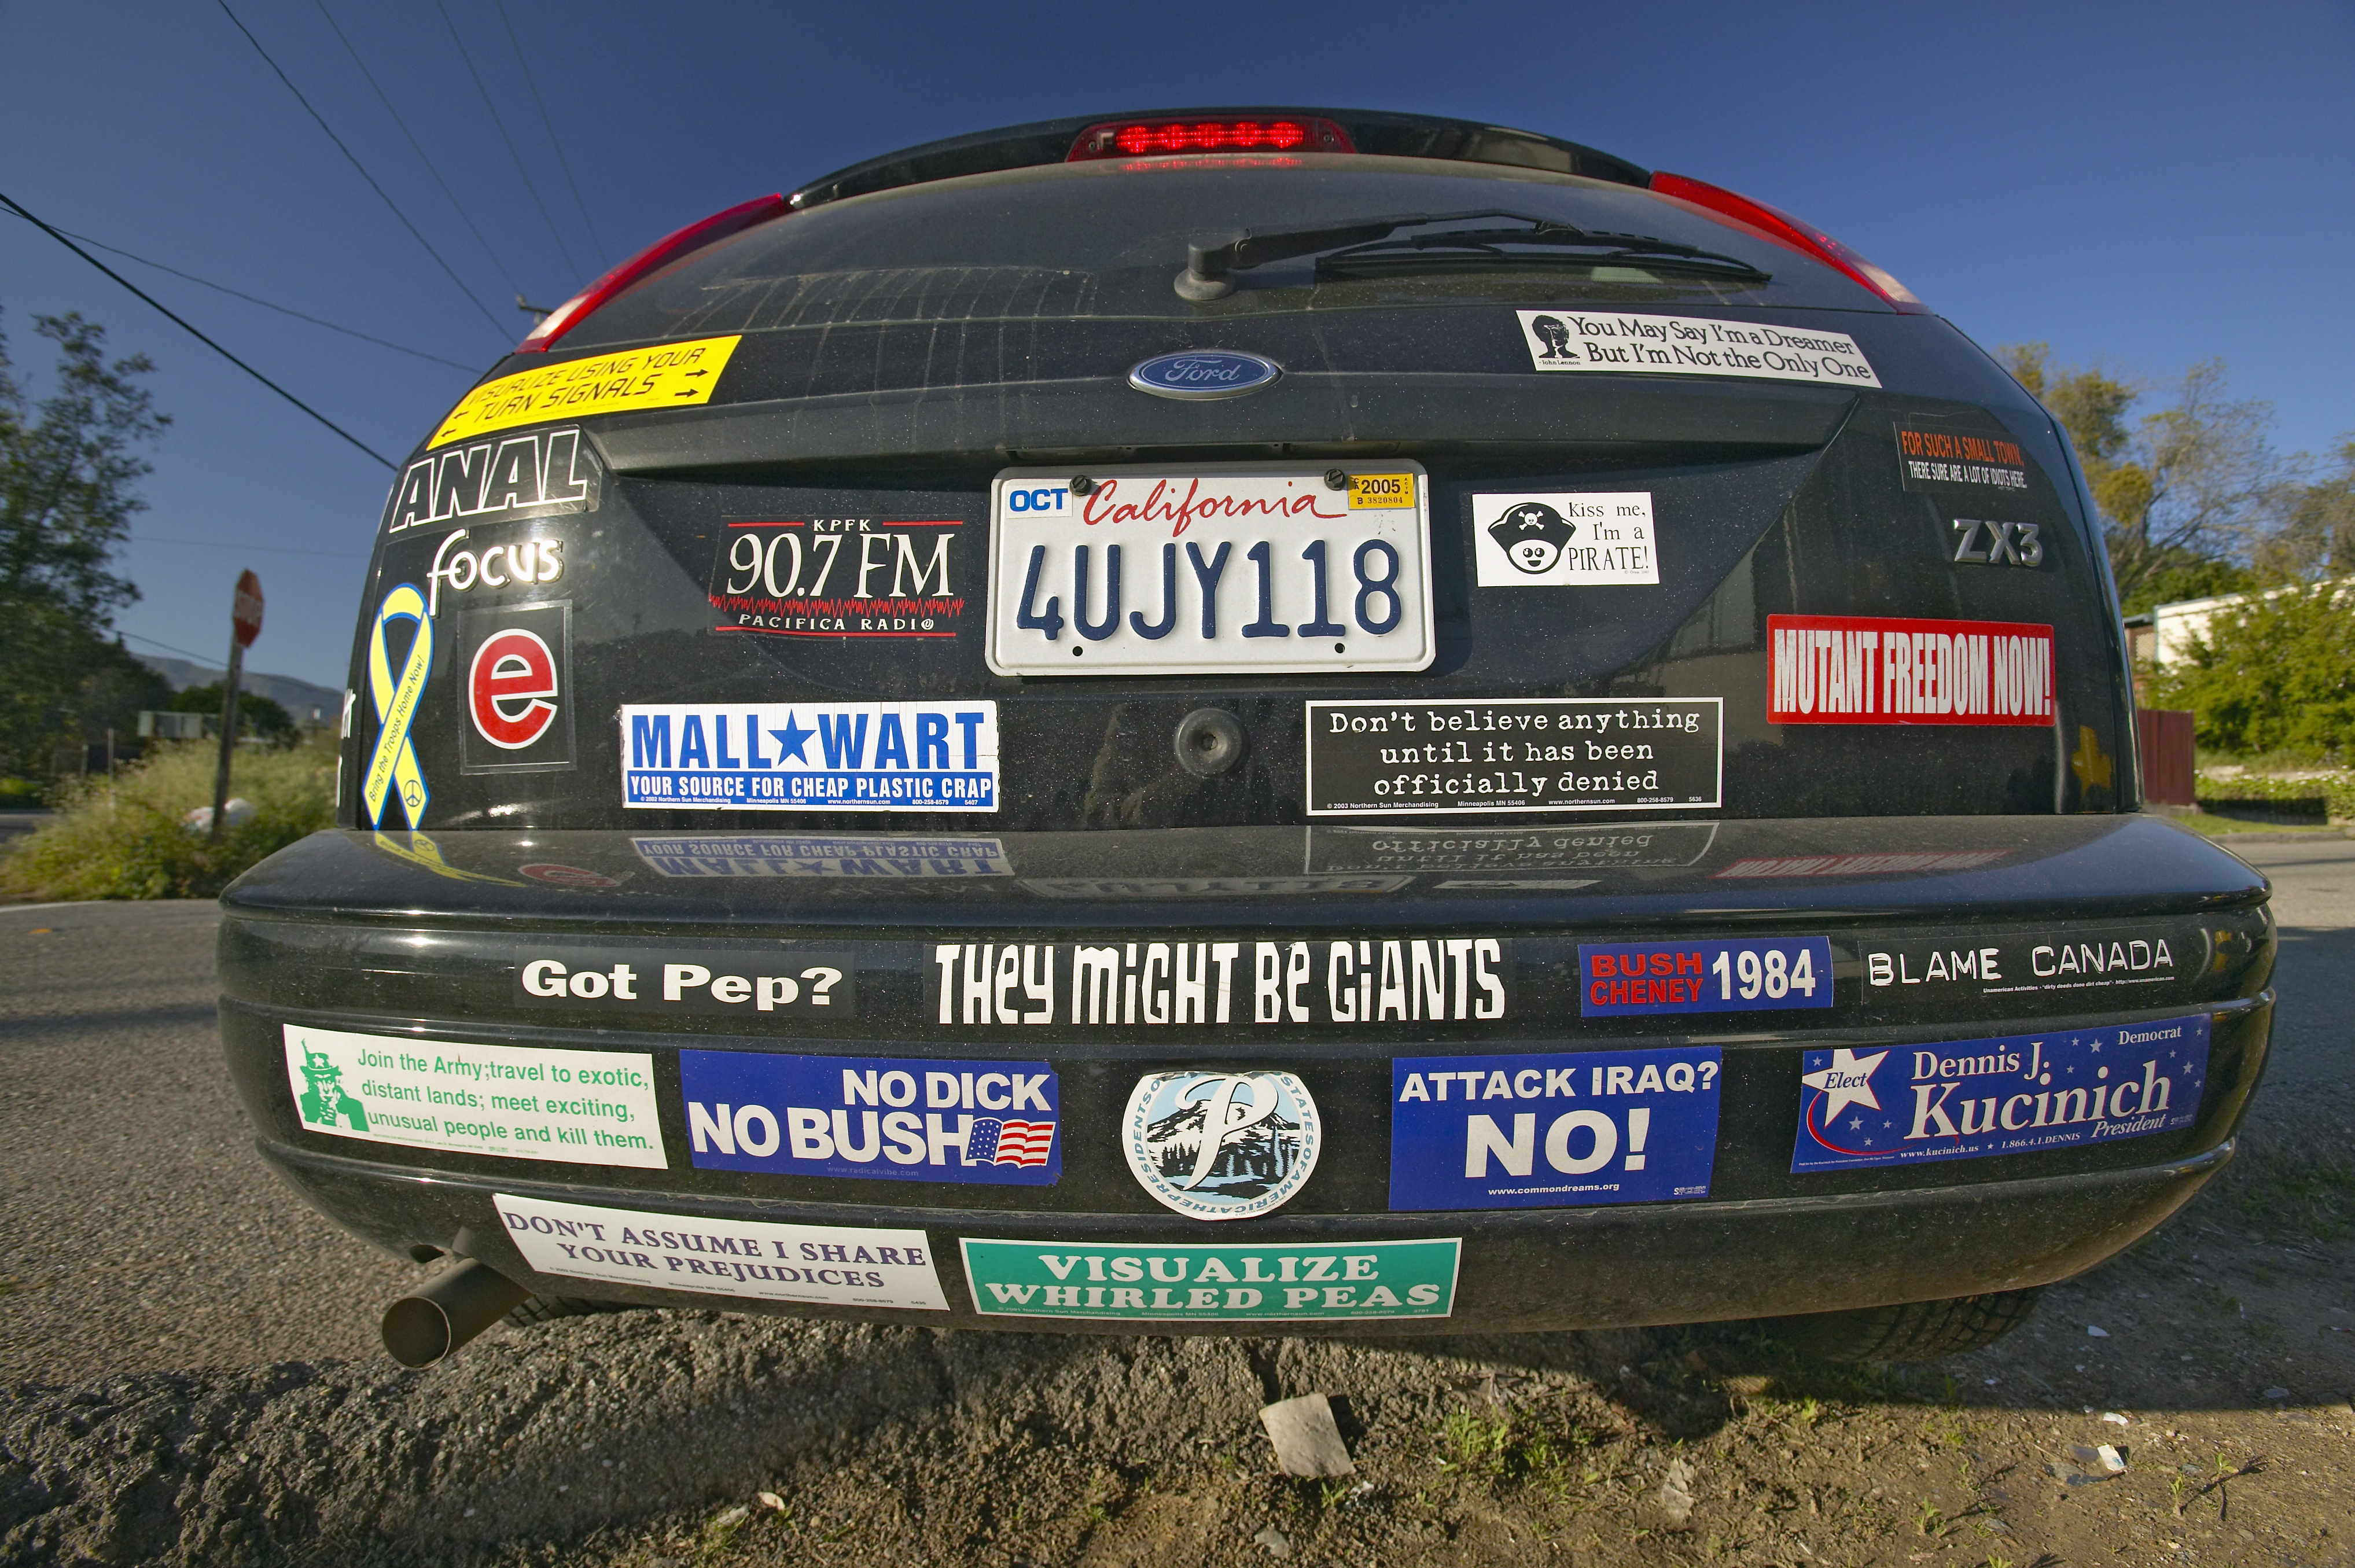 KUOW - What's with Seattle bumper stickers these days?